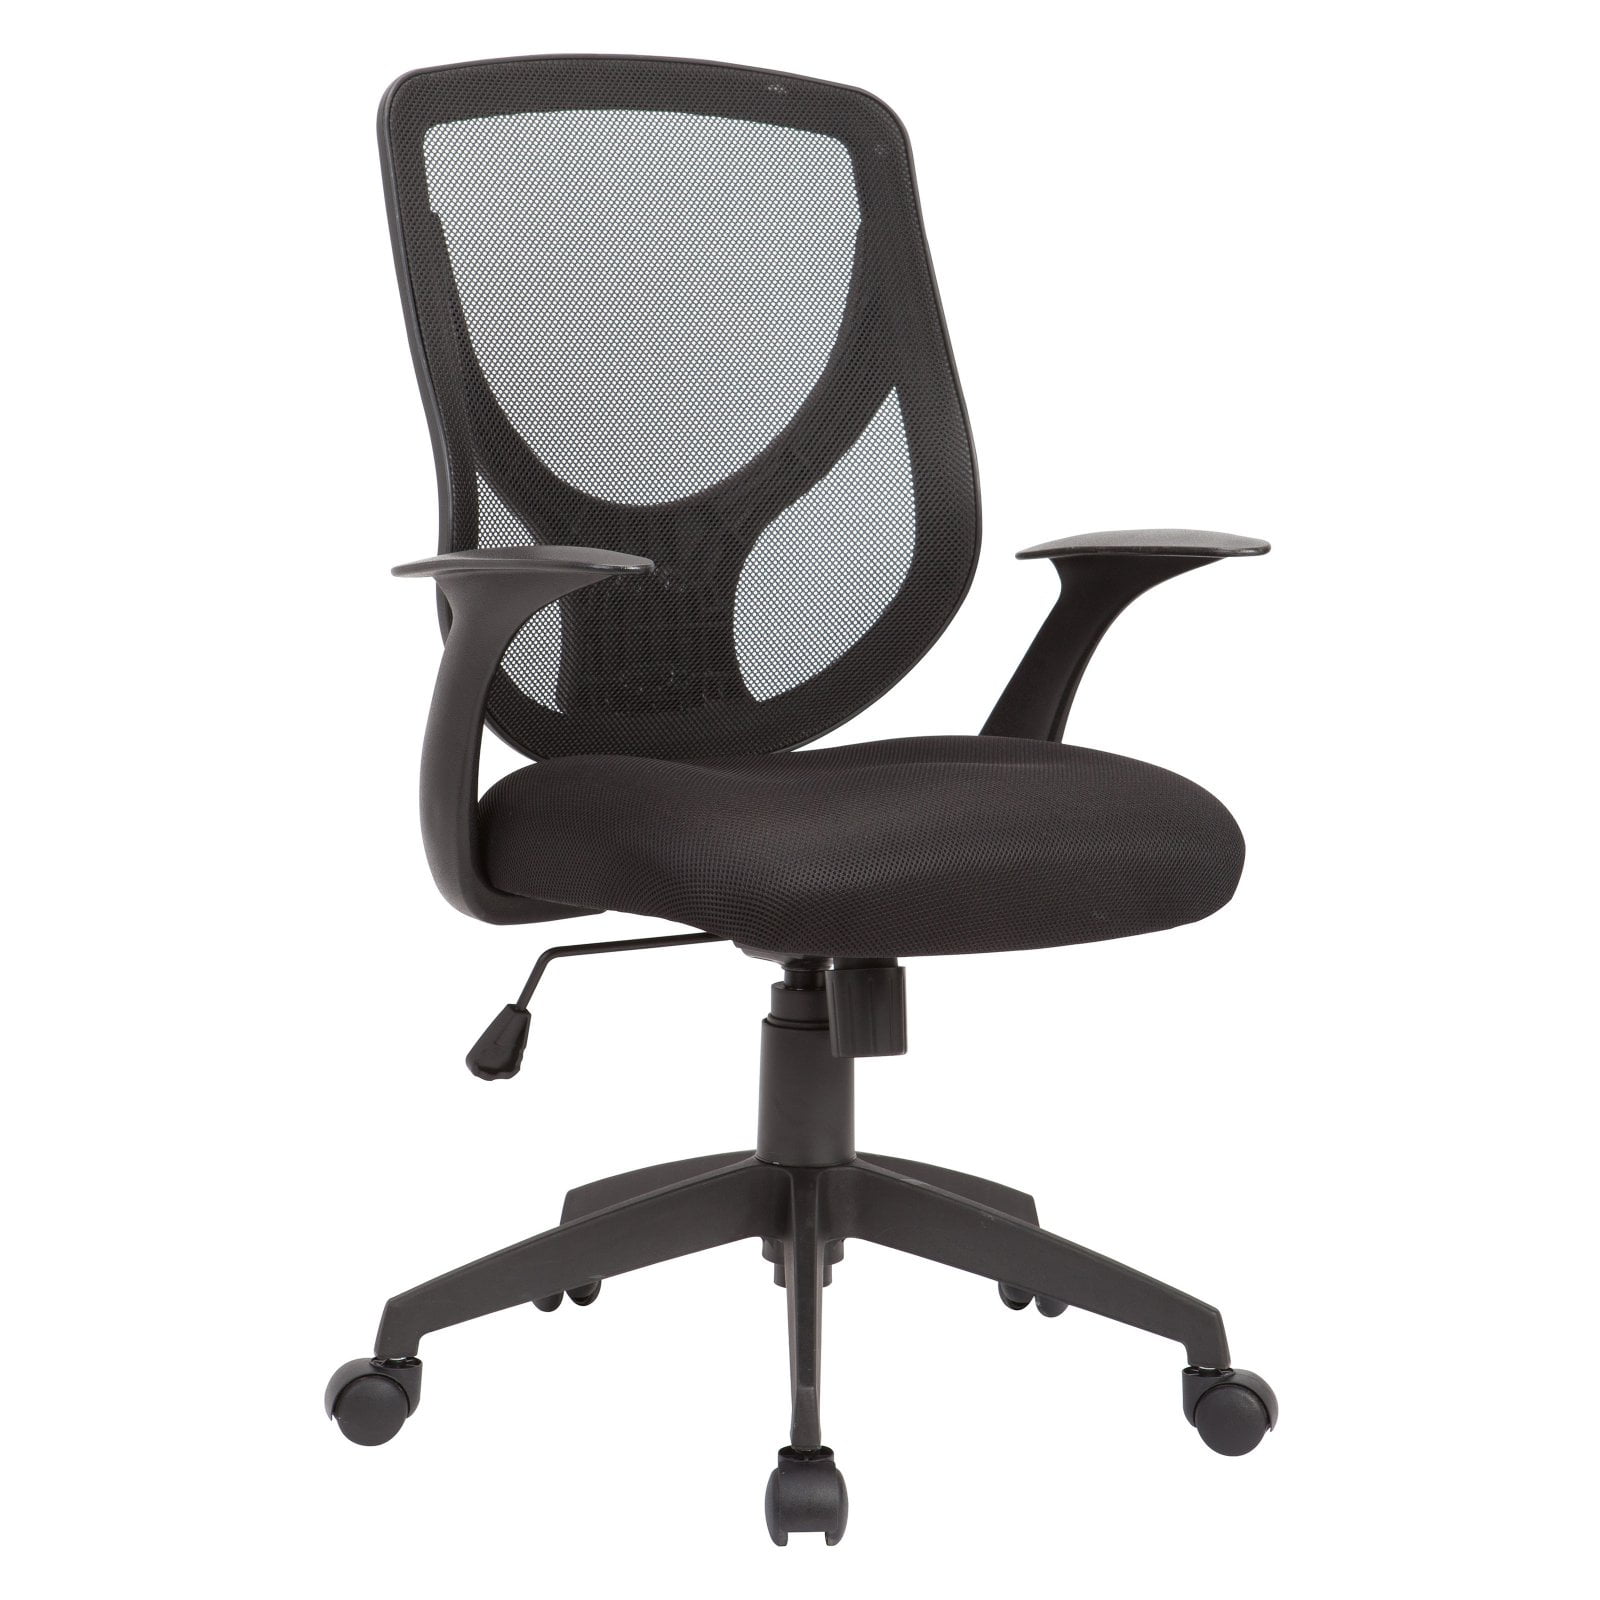 Christies Home Living Mesh Seat and Back Adjustable Swivel Office Chair